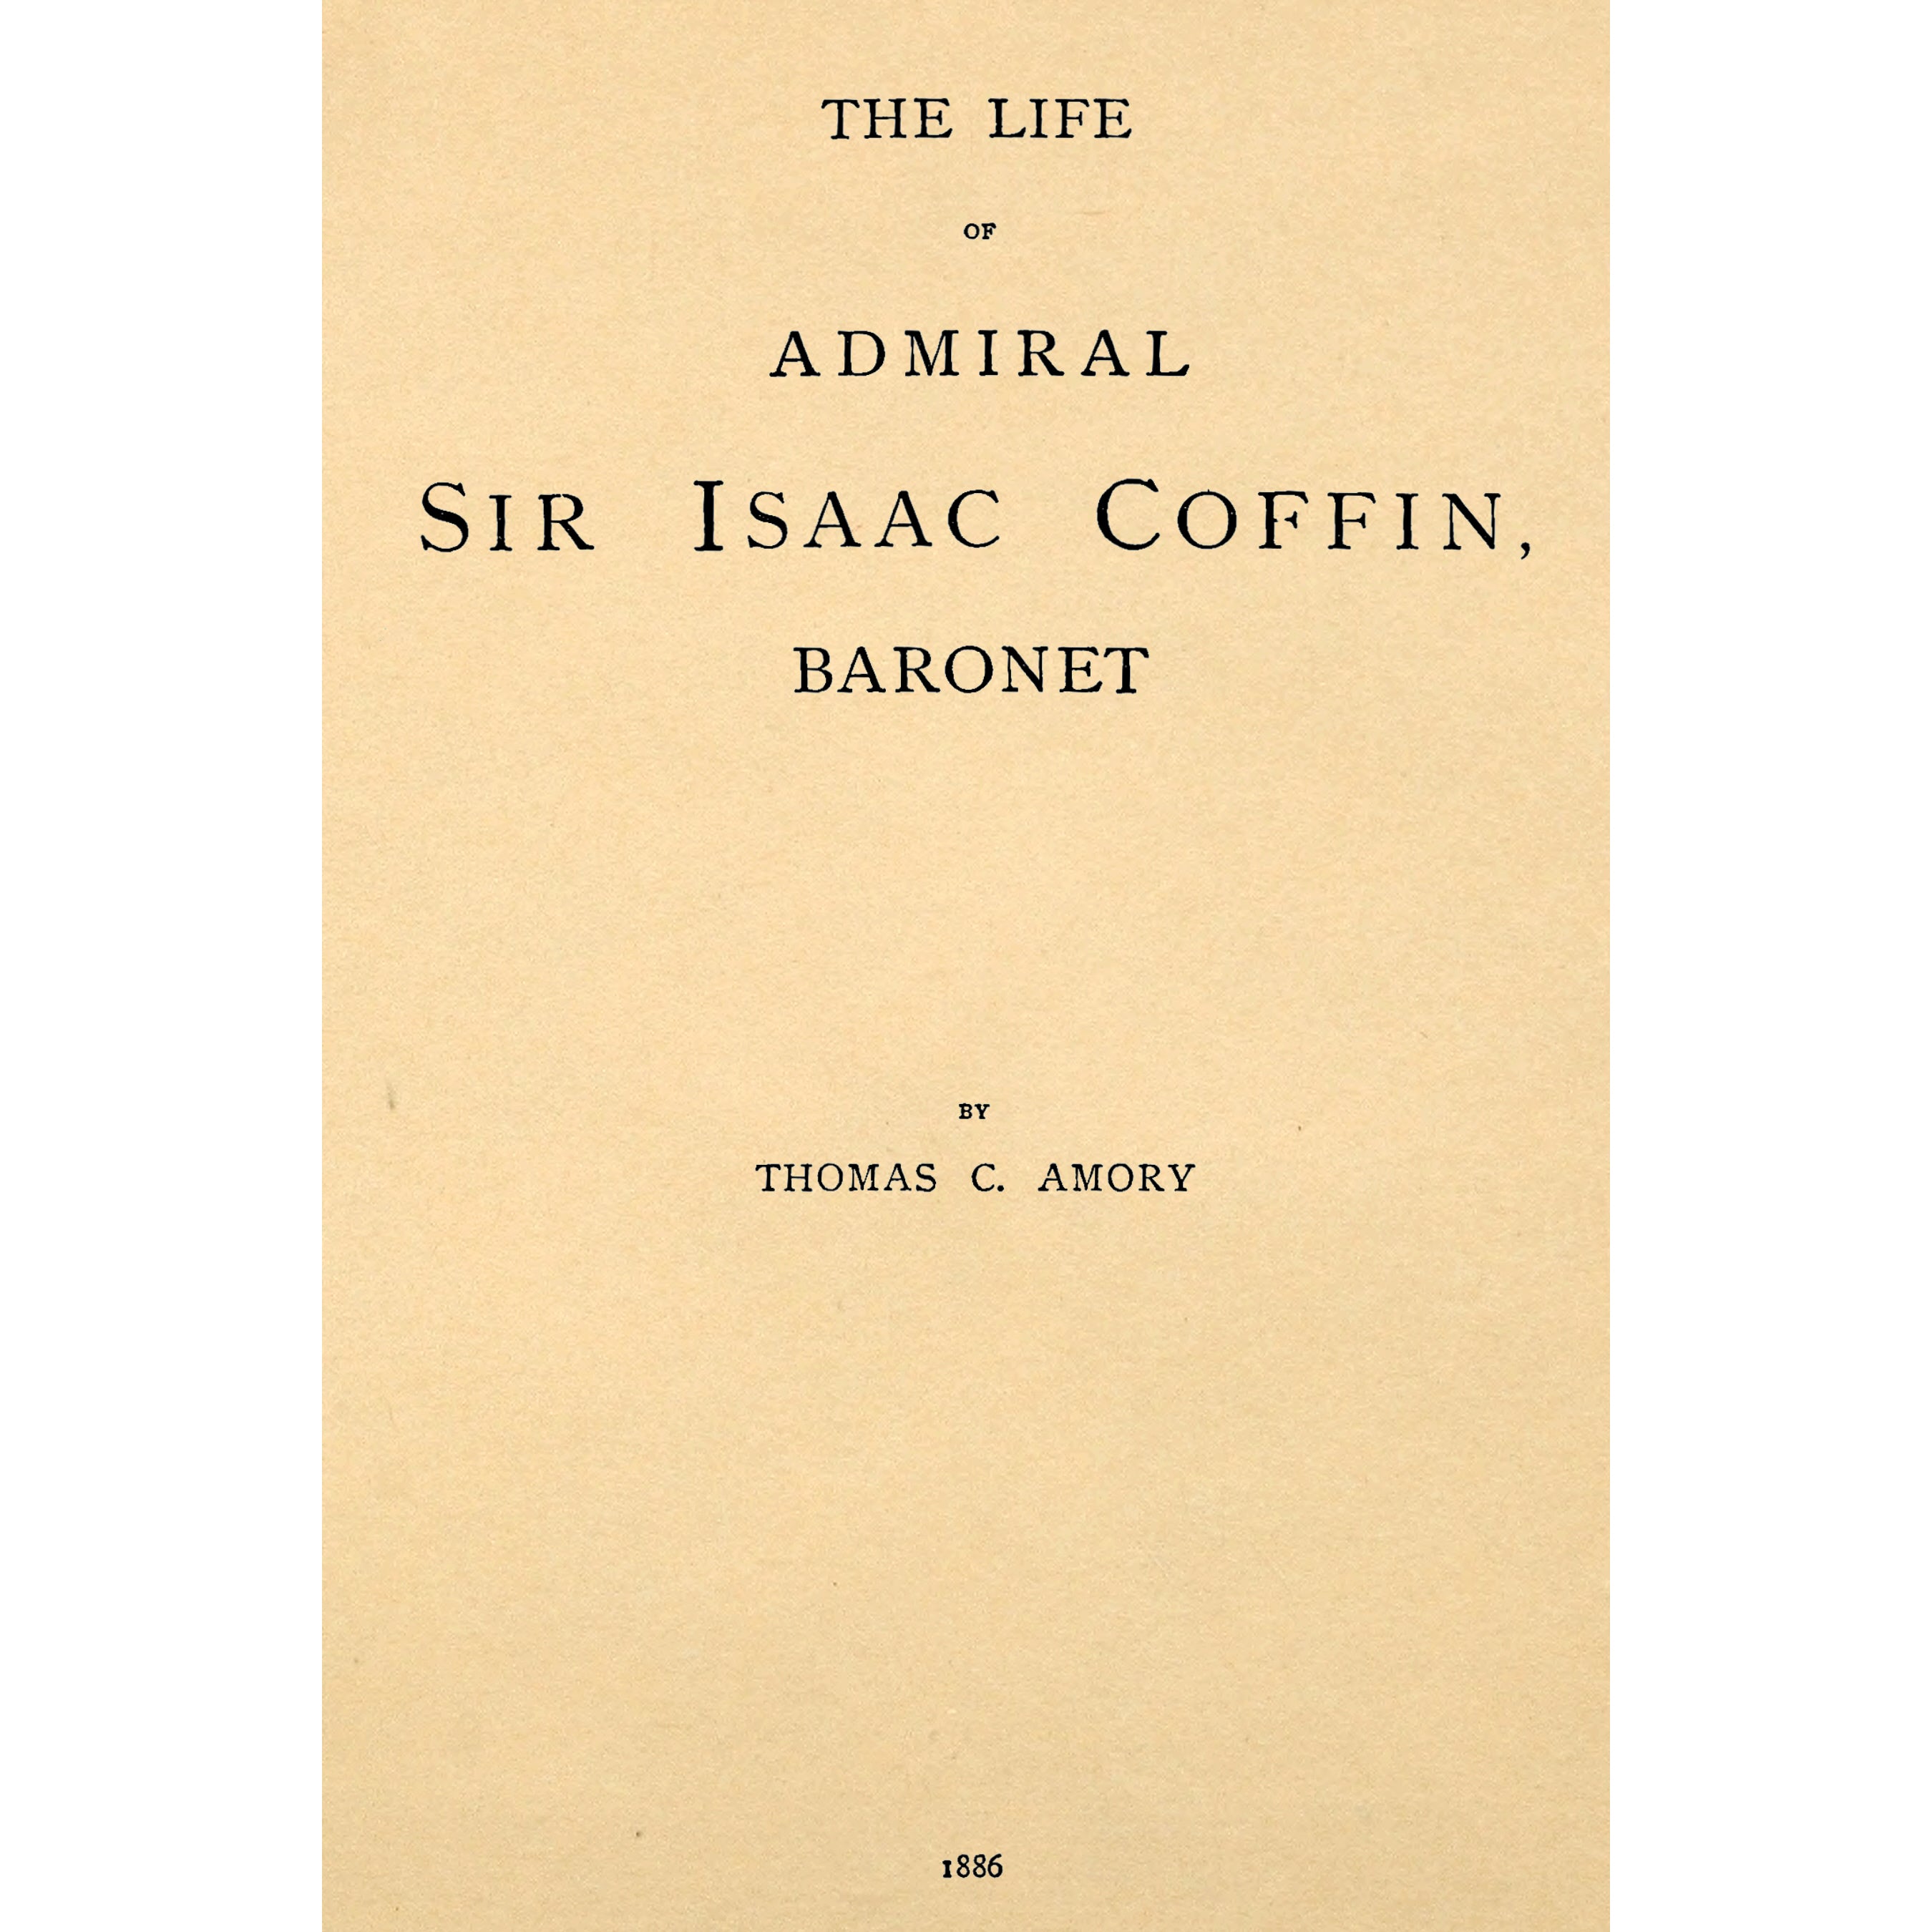 The Life of Admiral Sir Isaac Coffin, Barone